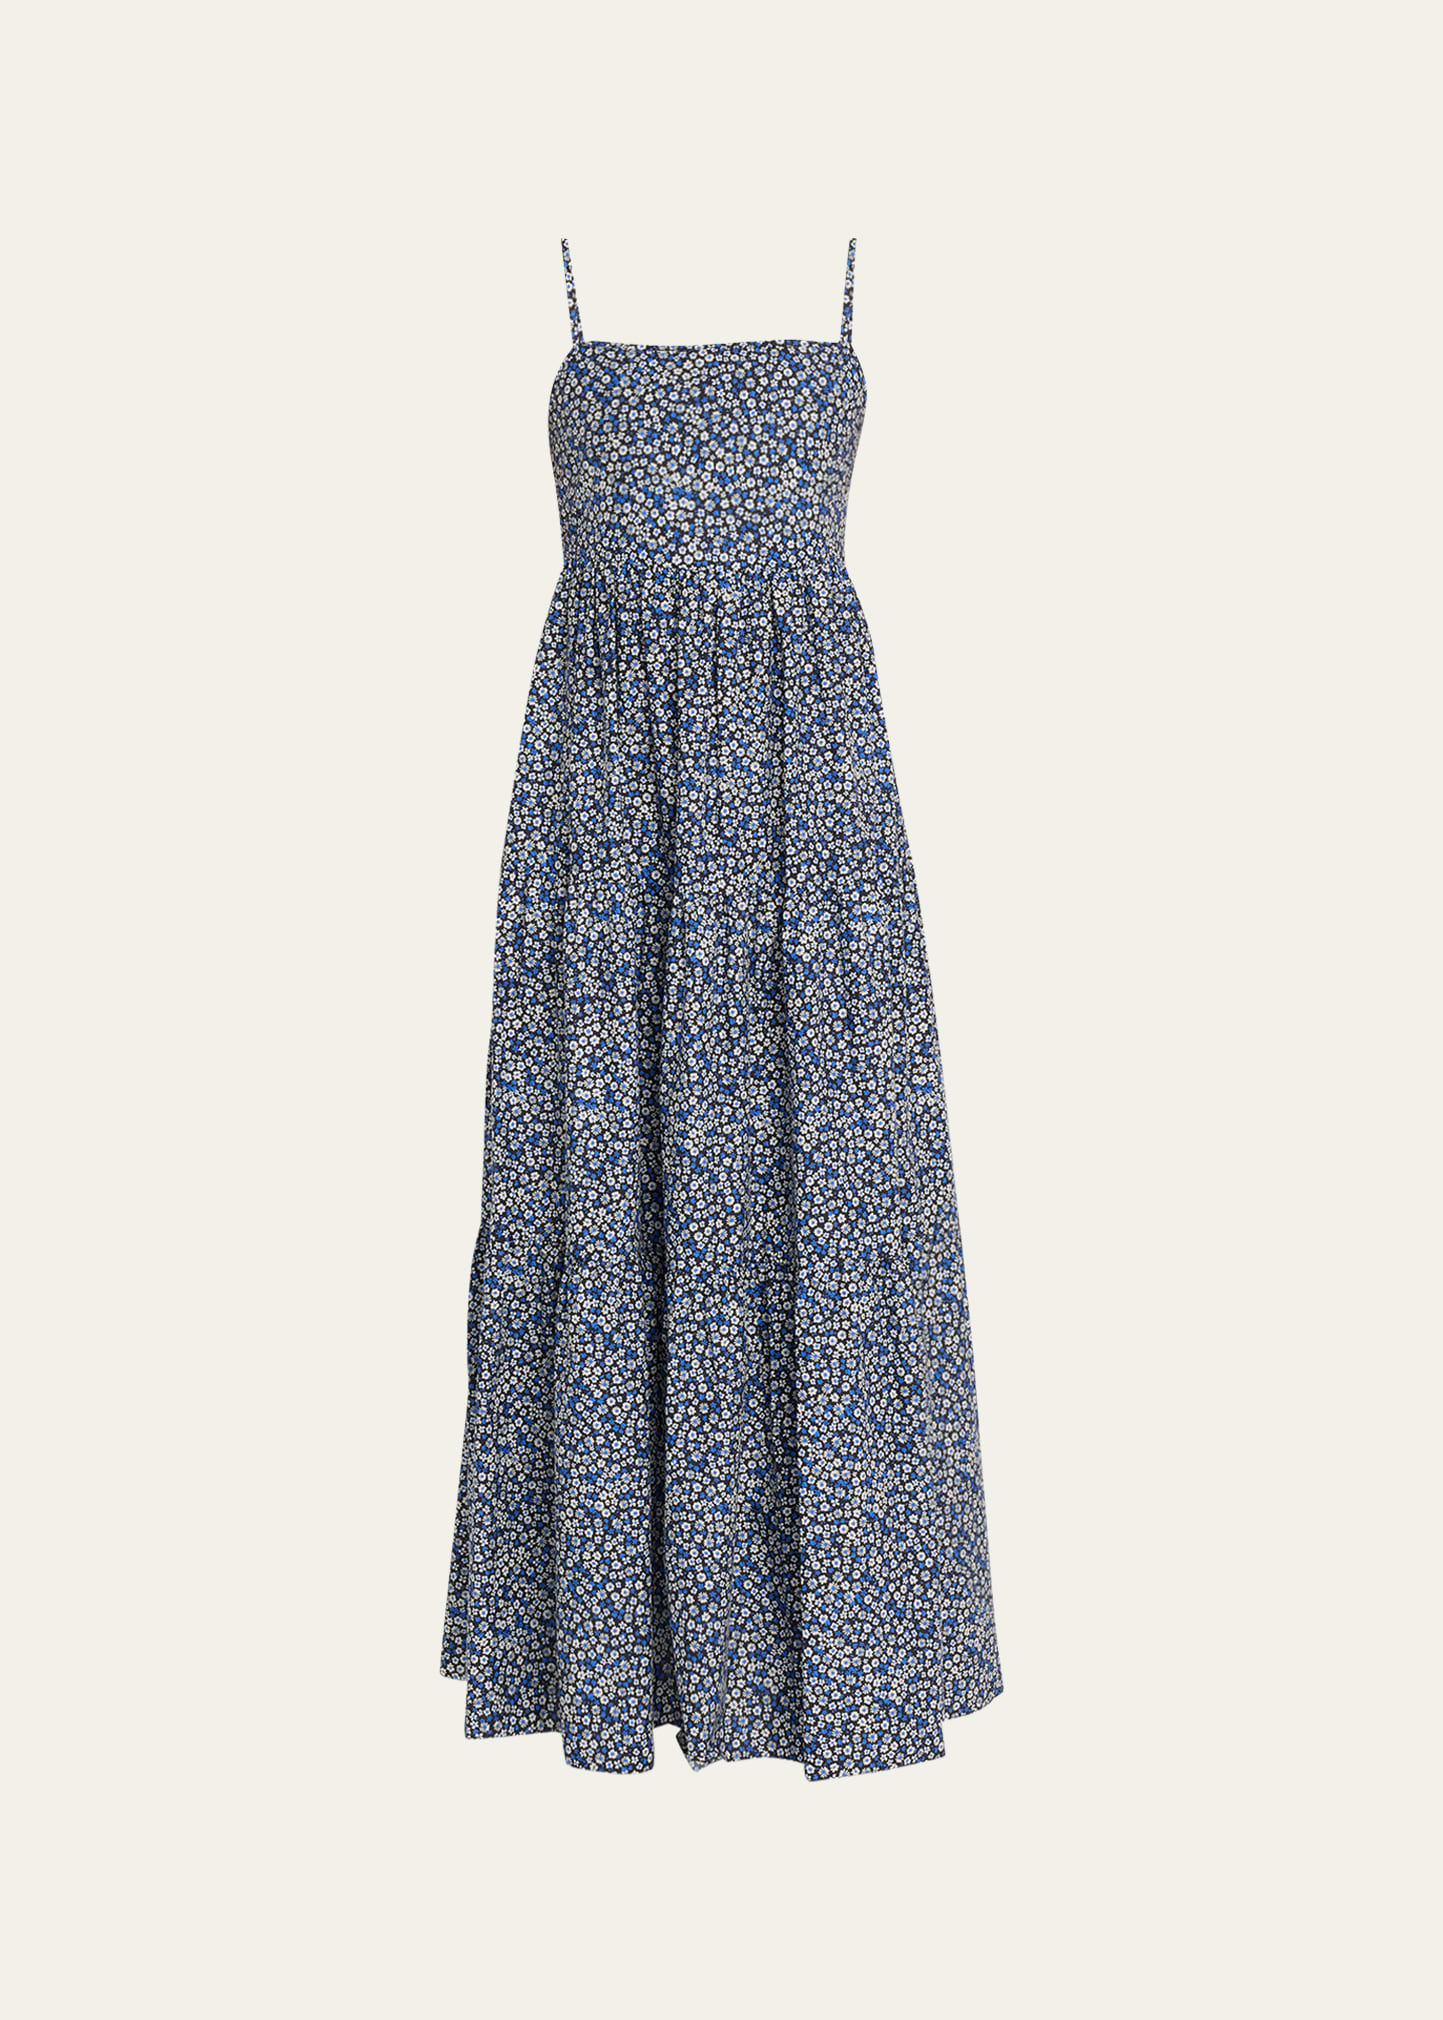 Matteau Tiered Sundress In Forget Me Not